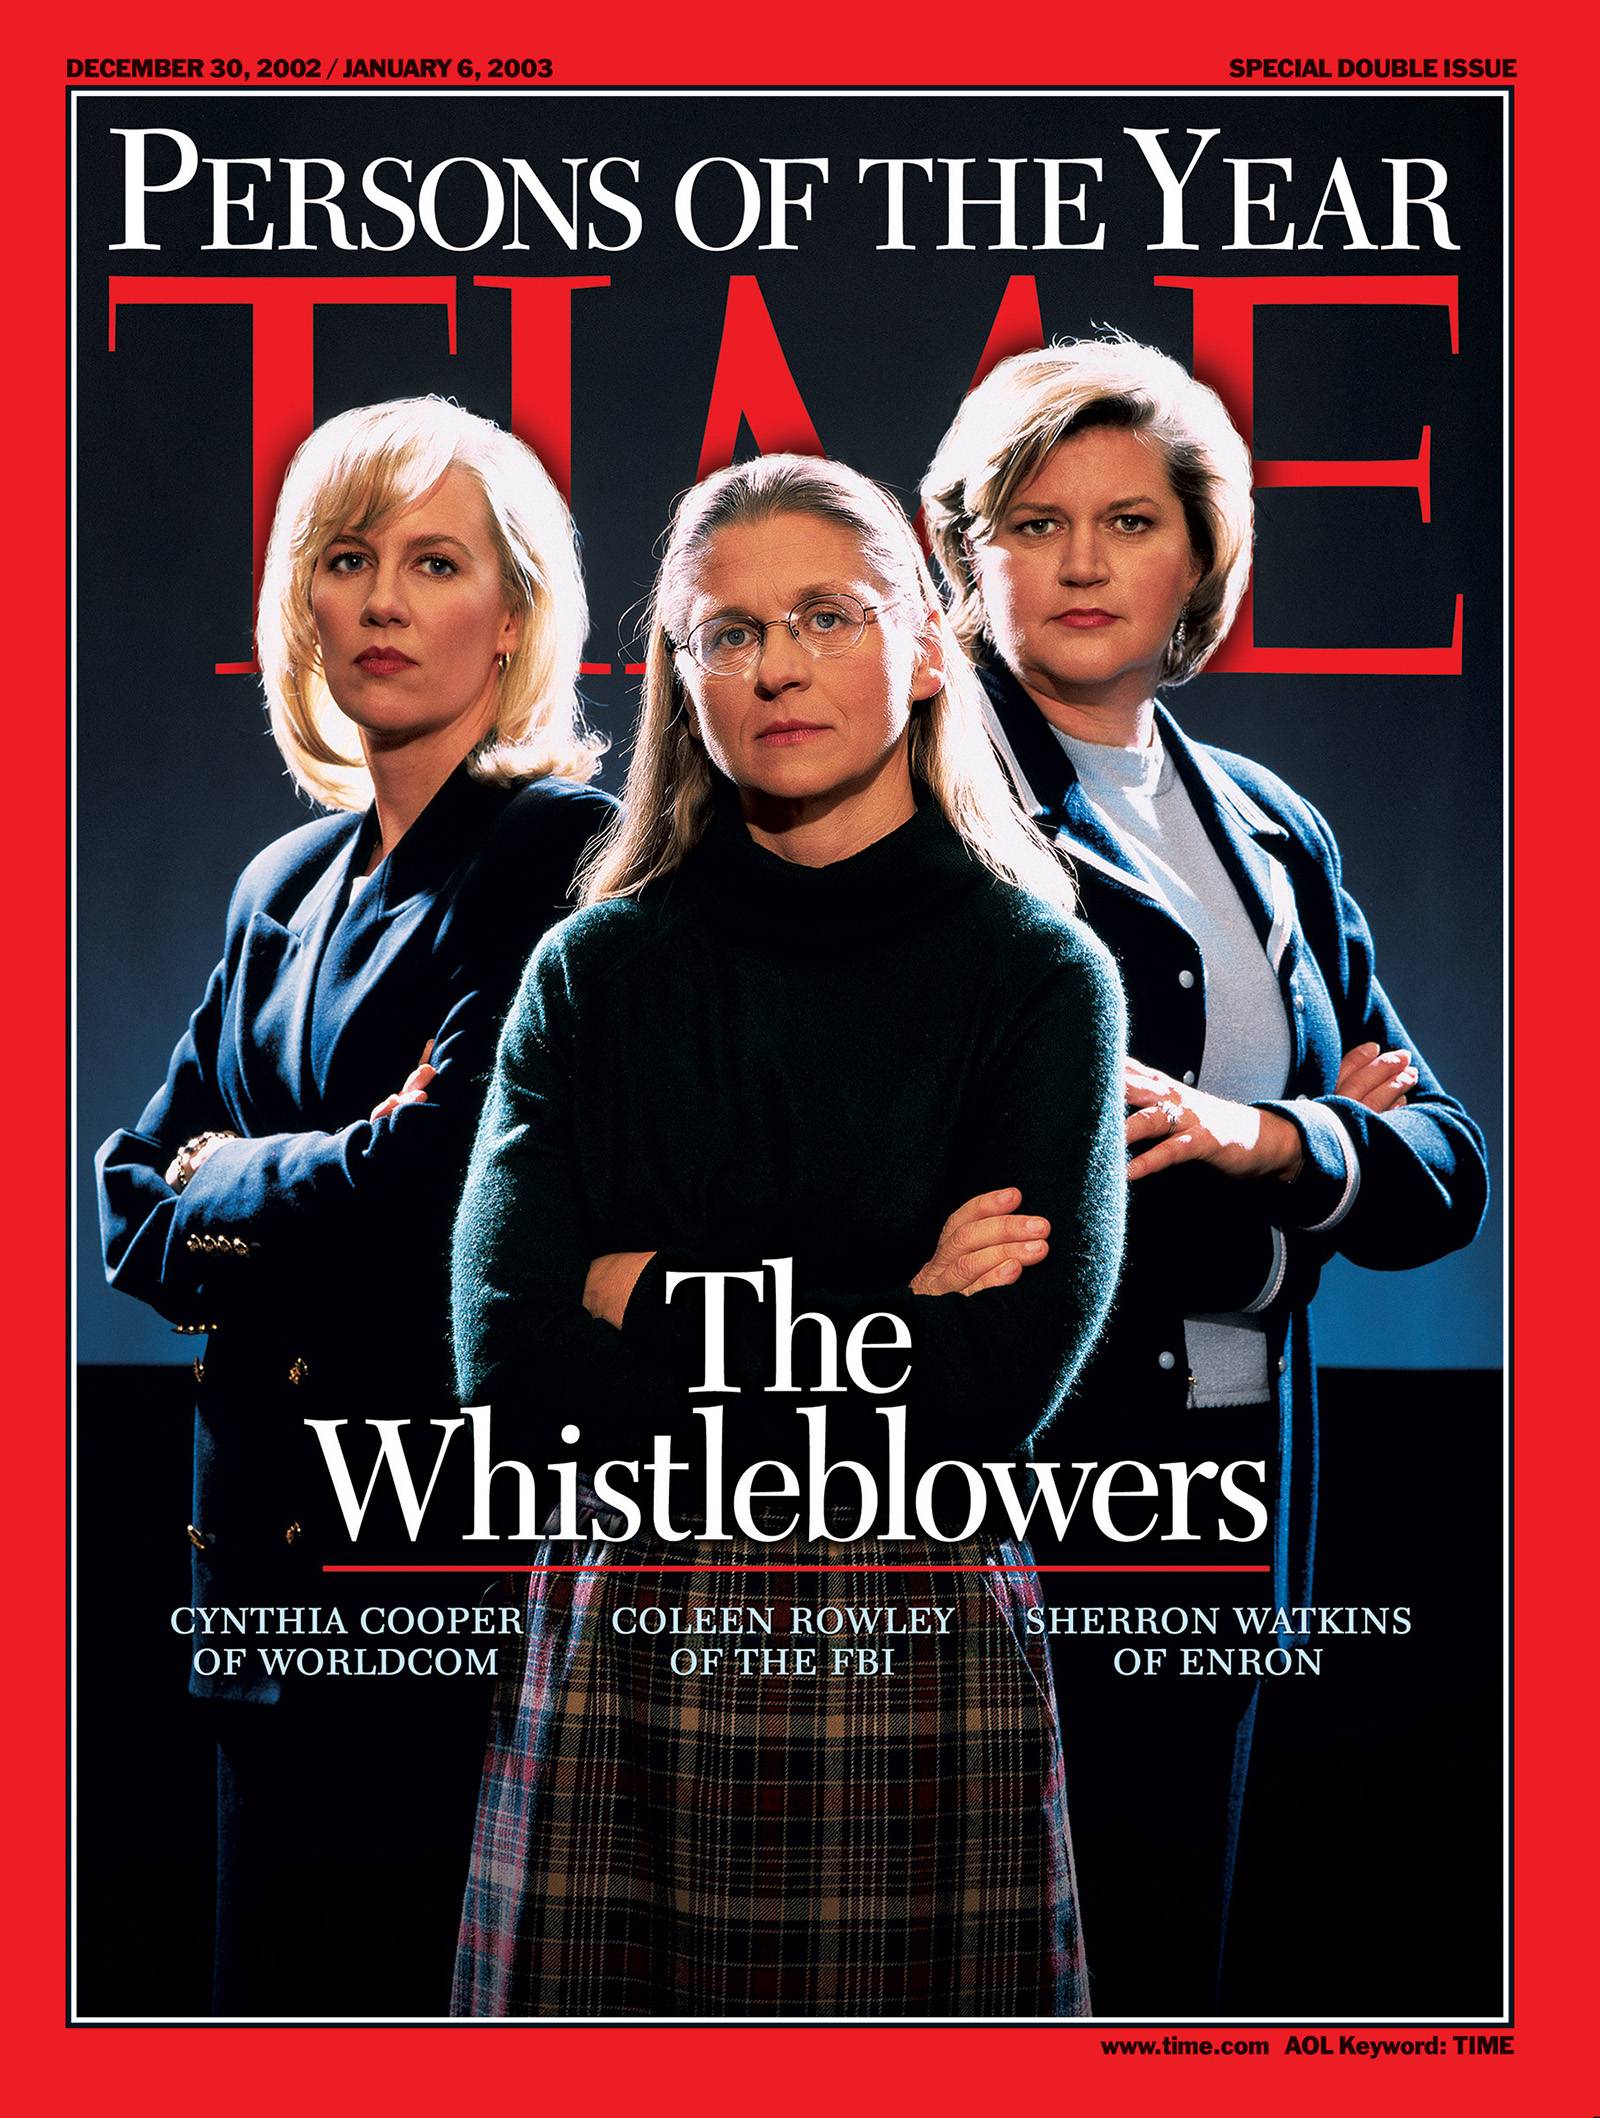 TIME magazine cover featuring 2002 Persons of the Year, "The Whistleblowers": Cynthia Cooper, Coleen Rowley, and Sherron Watkins